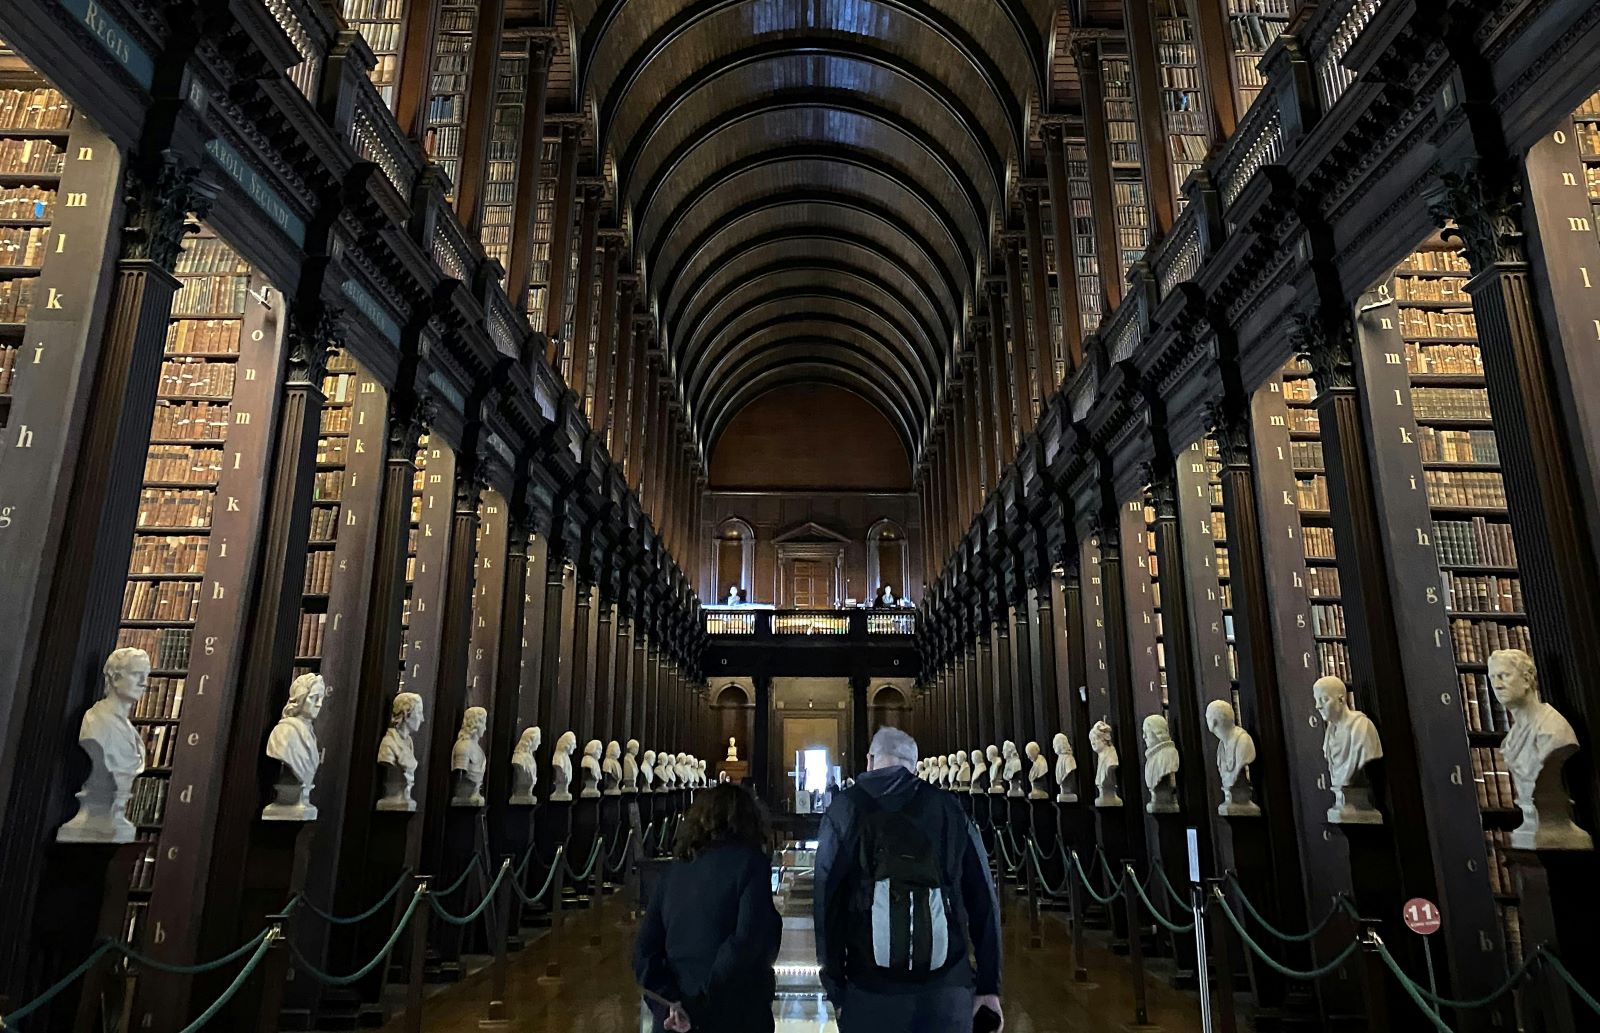 <p class="wp-caption-text">Image Credit: Pexel / Andrea barsali</p>  <p>See the Book of Kells, a stunningly beautiful manuscript created by Celtic monks around 800 AD. Trinity College also boasts the Long Room, one of the world’s most impressive libraries.</p>